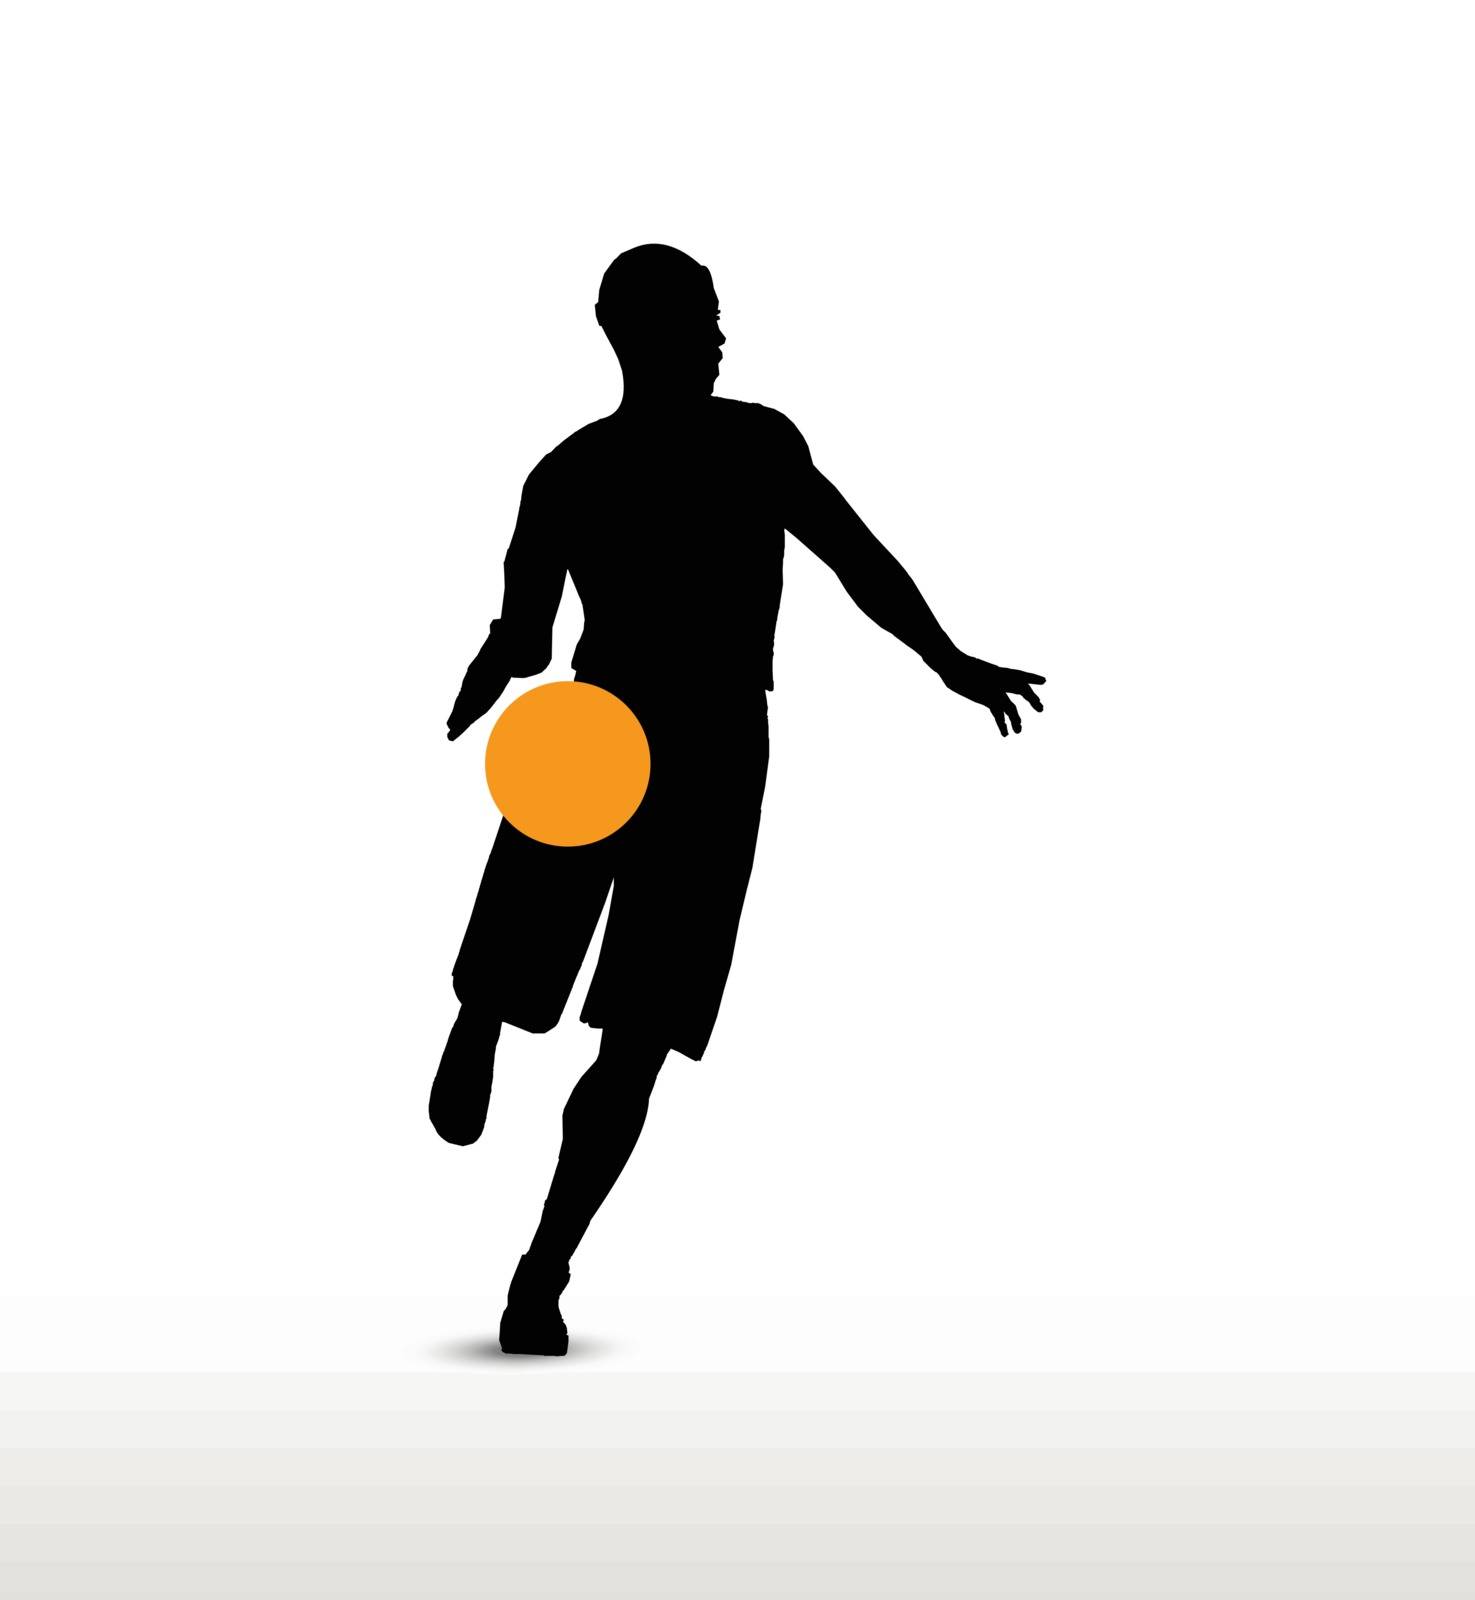 vector image - basketball player silhouette in drible pose, isolated on white background
